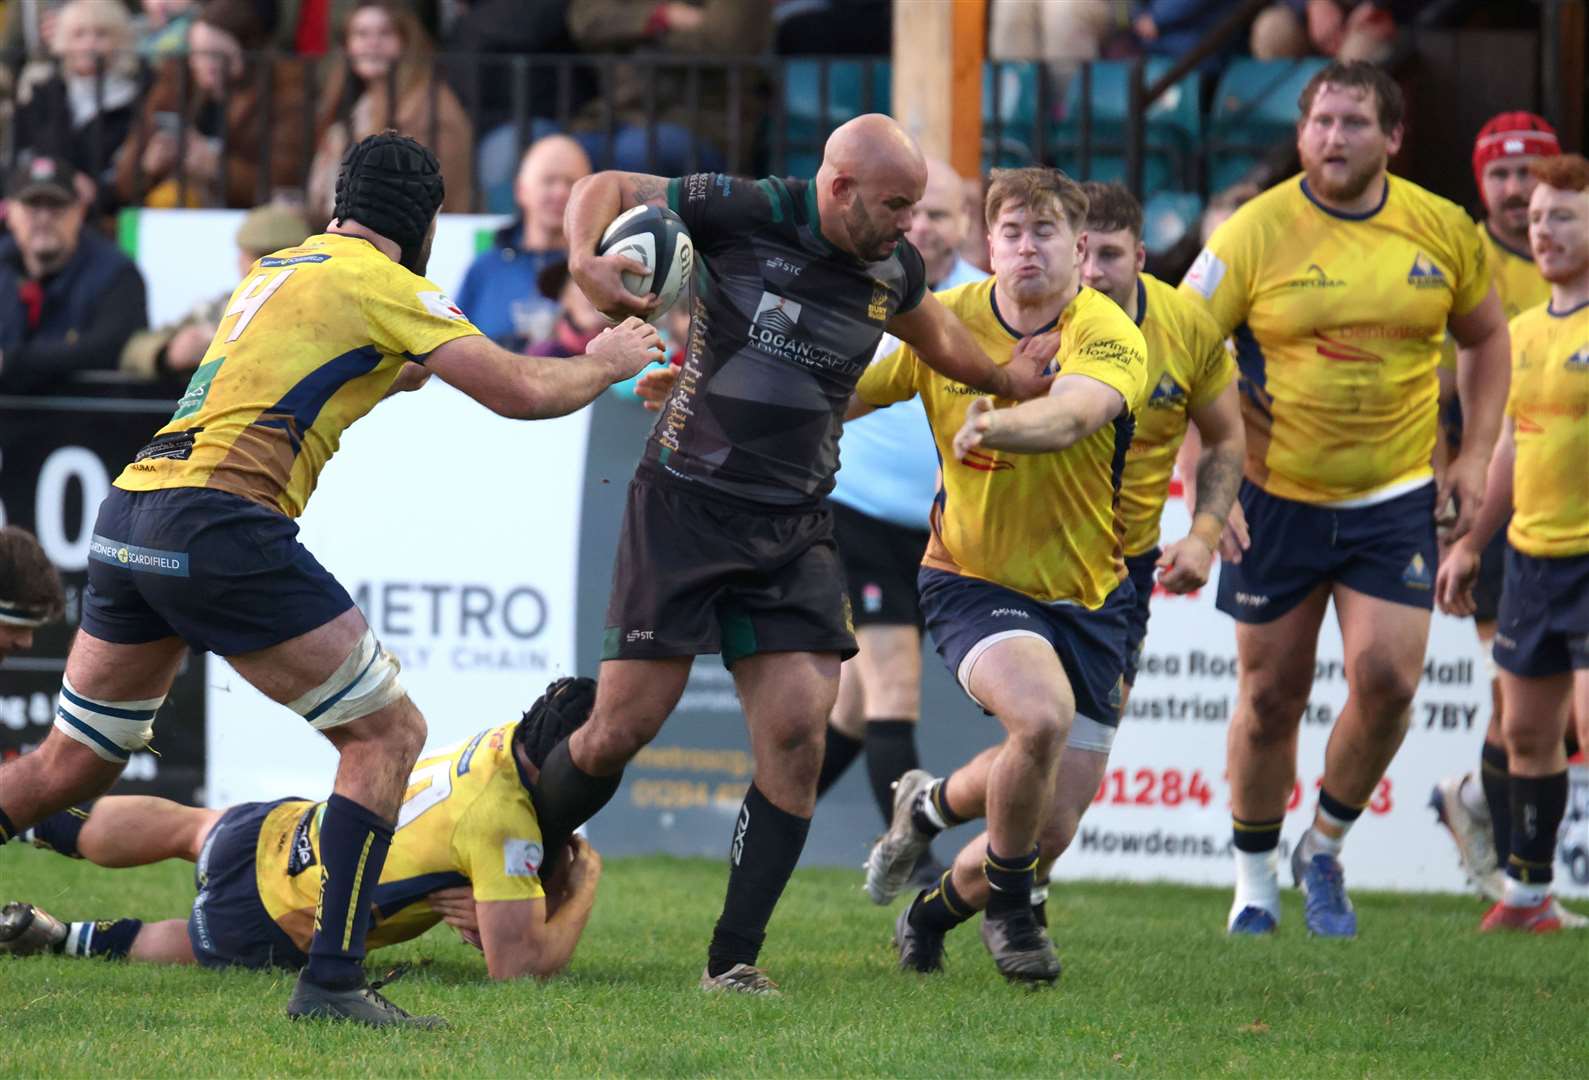 Try-scorer Shaq Meyers holds off a tackle on a surge through the Worthing defensive line Picture: Richard Marsham